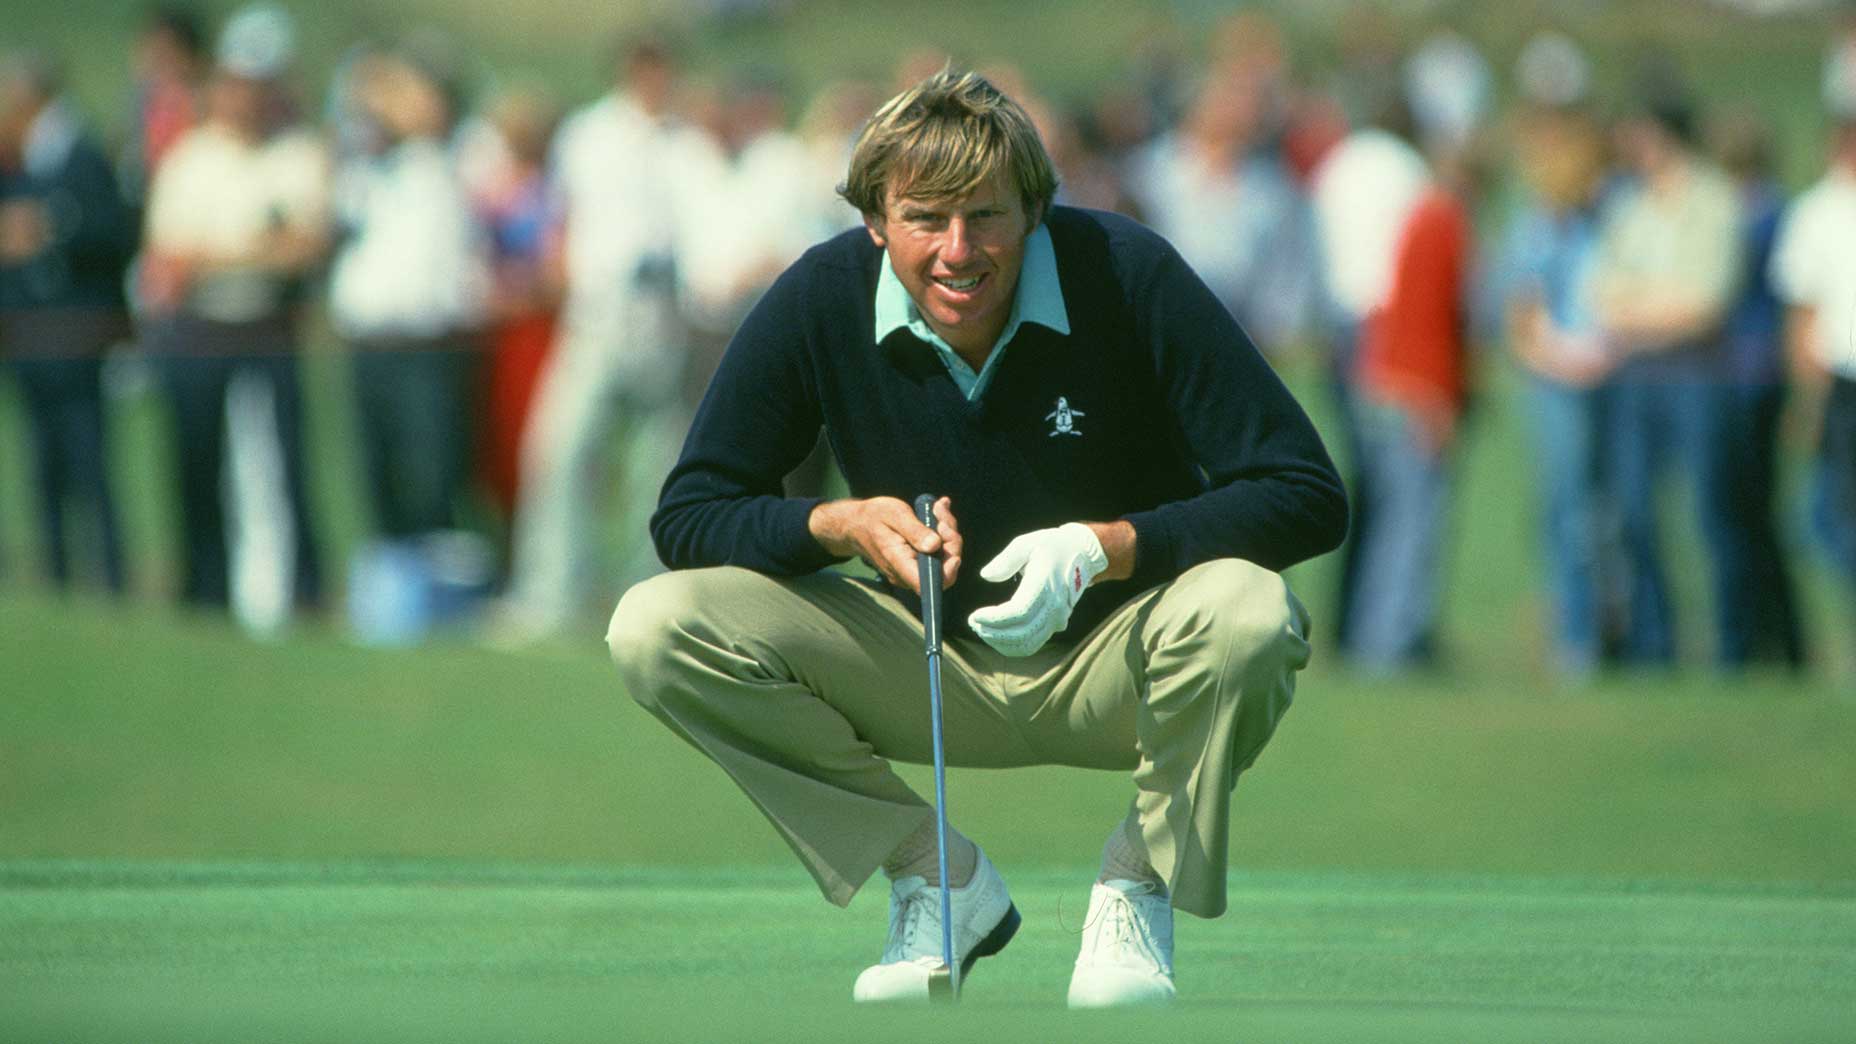 Peter Oosterhuis reads a putt during the 1982 Open Championship at Royal Troon Golf Club in Troon, Scotland.